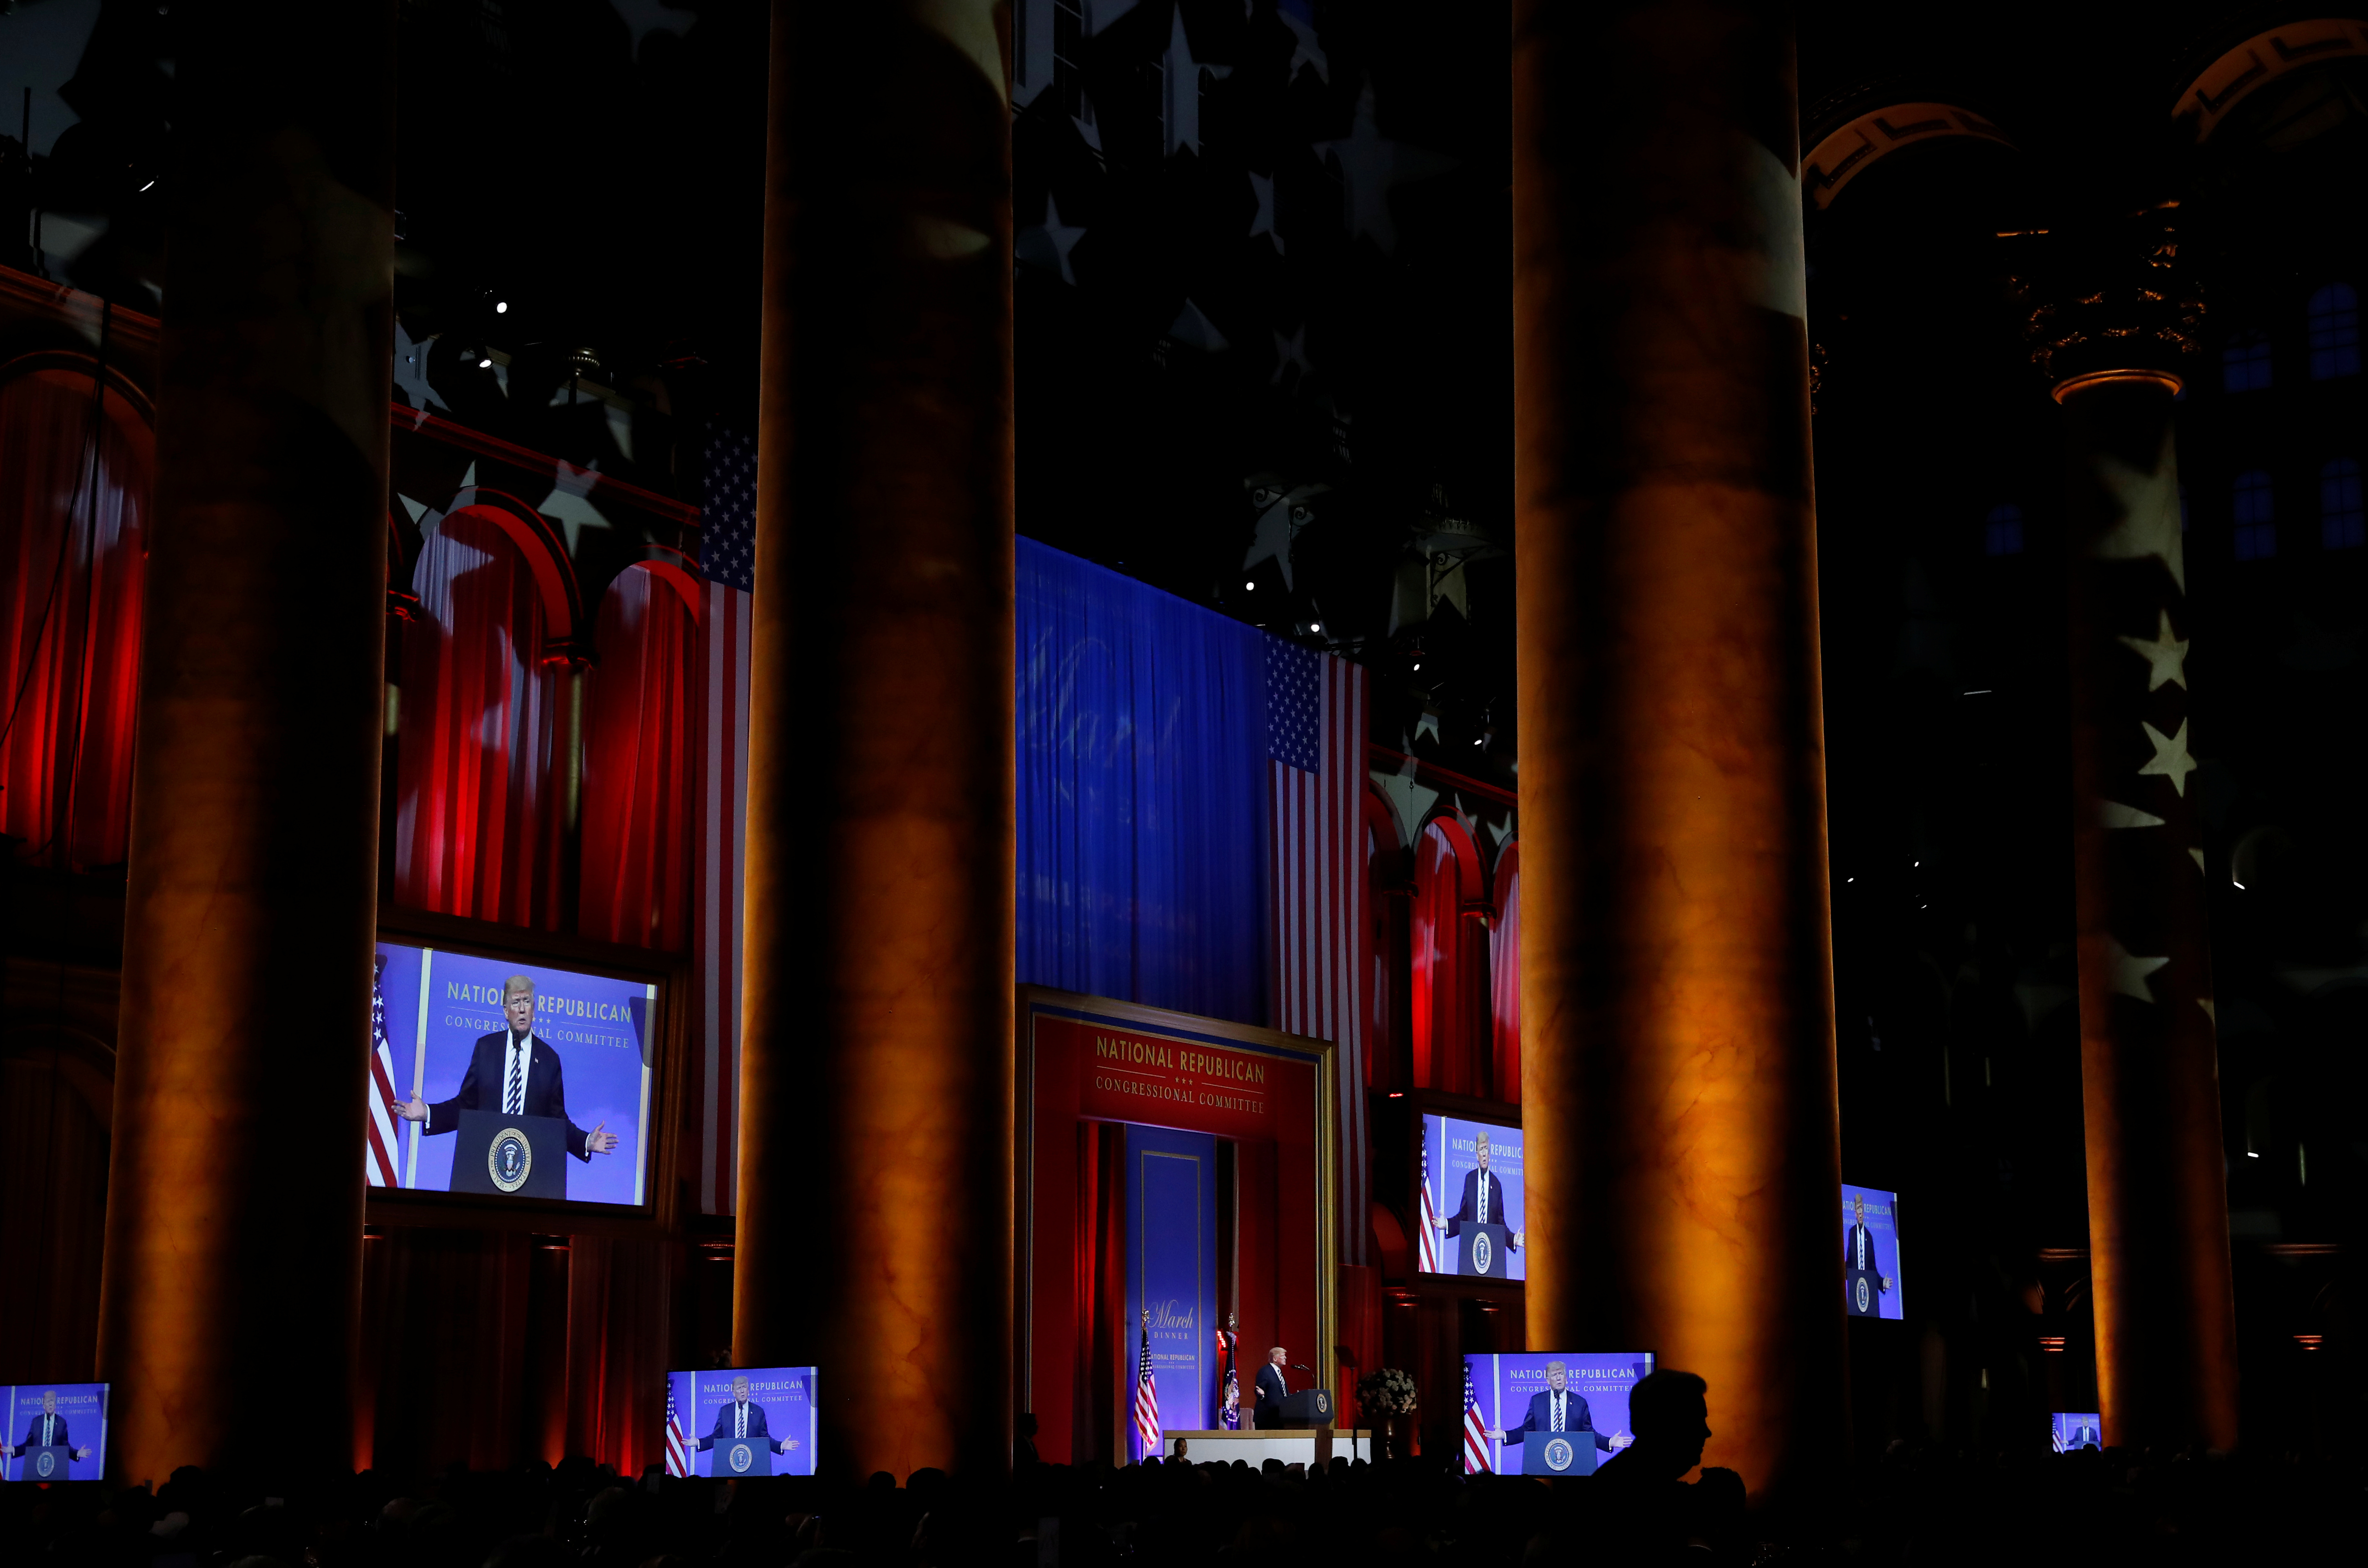 &copy; Reuters. FILE PHOTO: U.S. President Donald Trump delivers remarks at the National Republican Congressional Committee's annual March dinner at the National Building Museum in Washington, U.S., March 20, 2018. REUTERS/Leah Millis